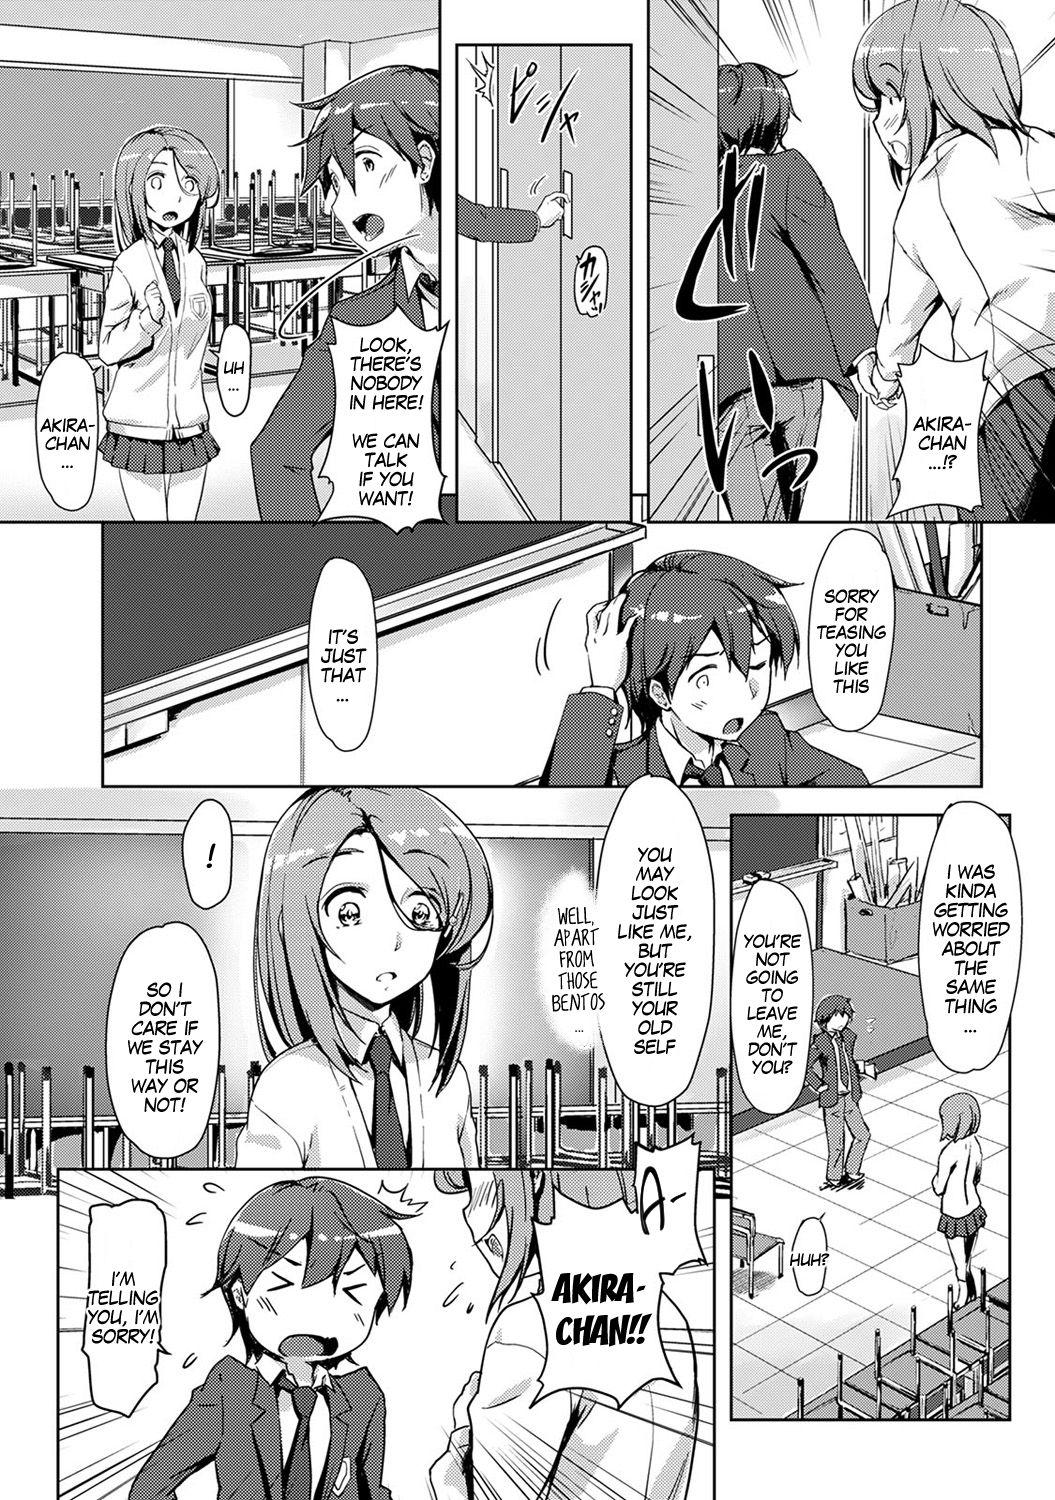 Shemale Porn Ecchi Shitara Irekawacchatta!? | We Switched Our Bodies After Having Sex!? Ch. 3 Beautiful - Page 10